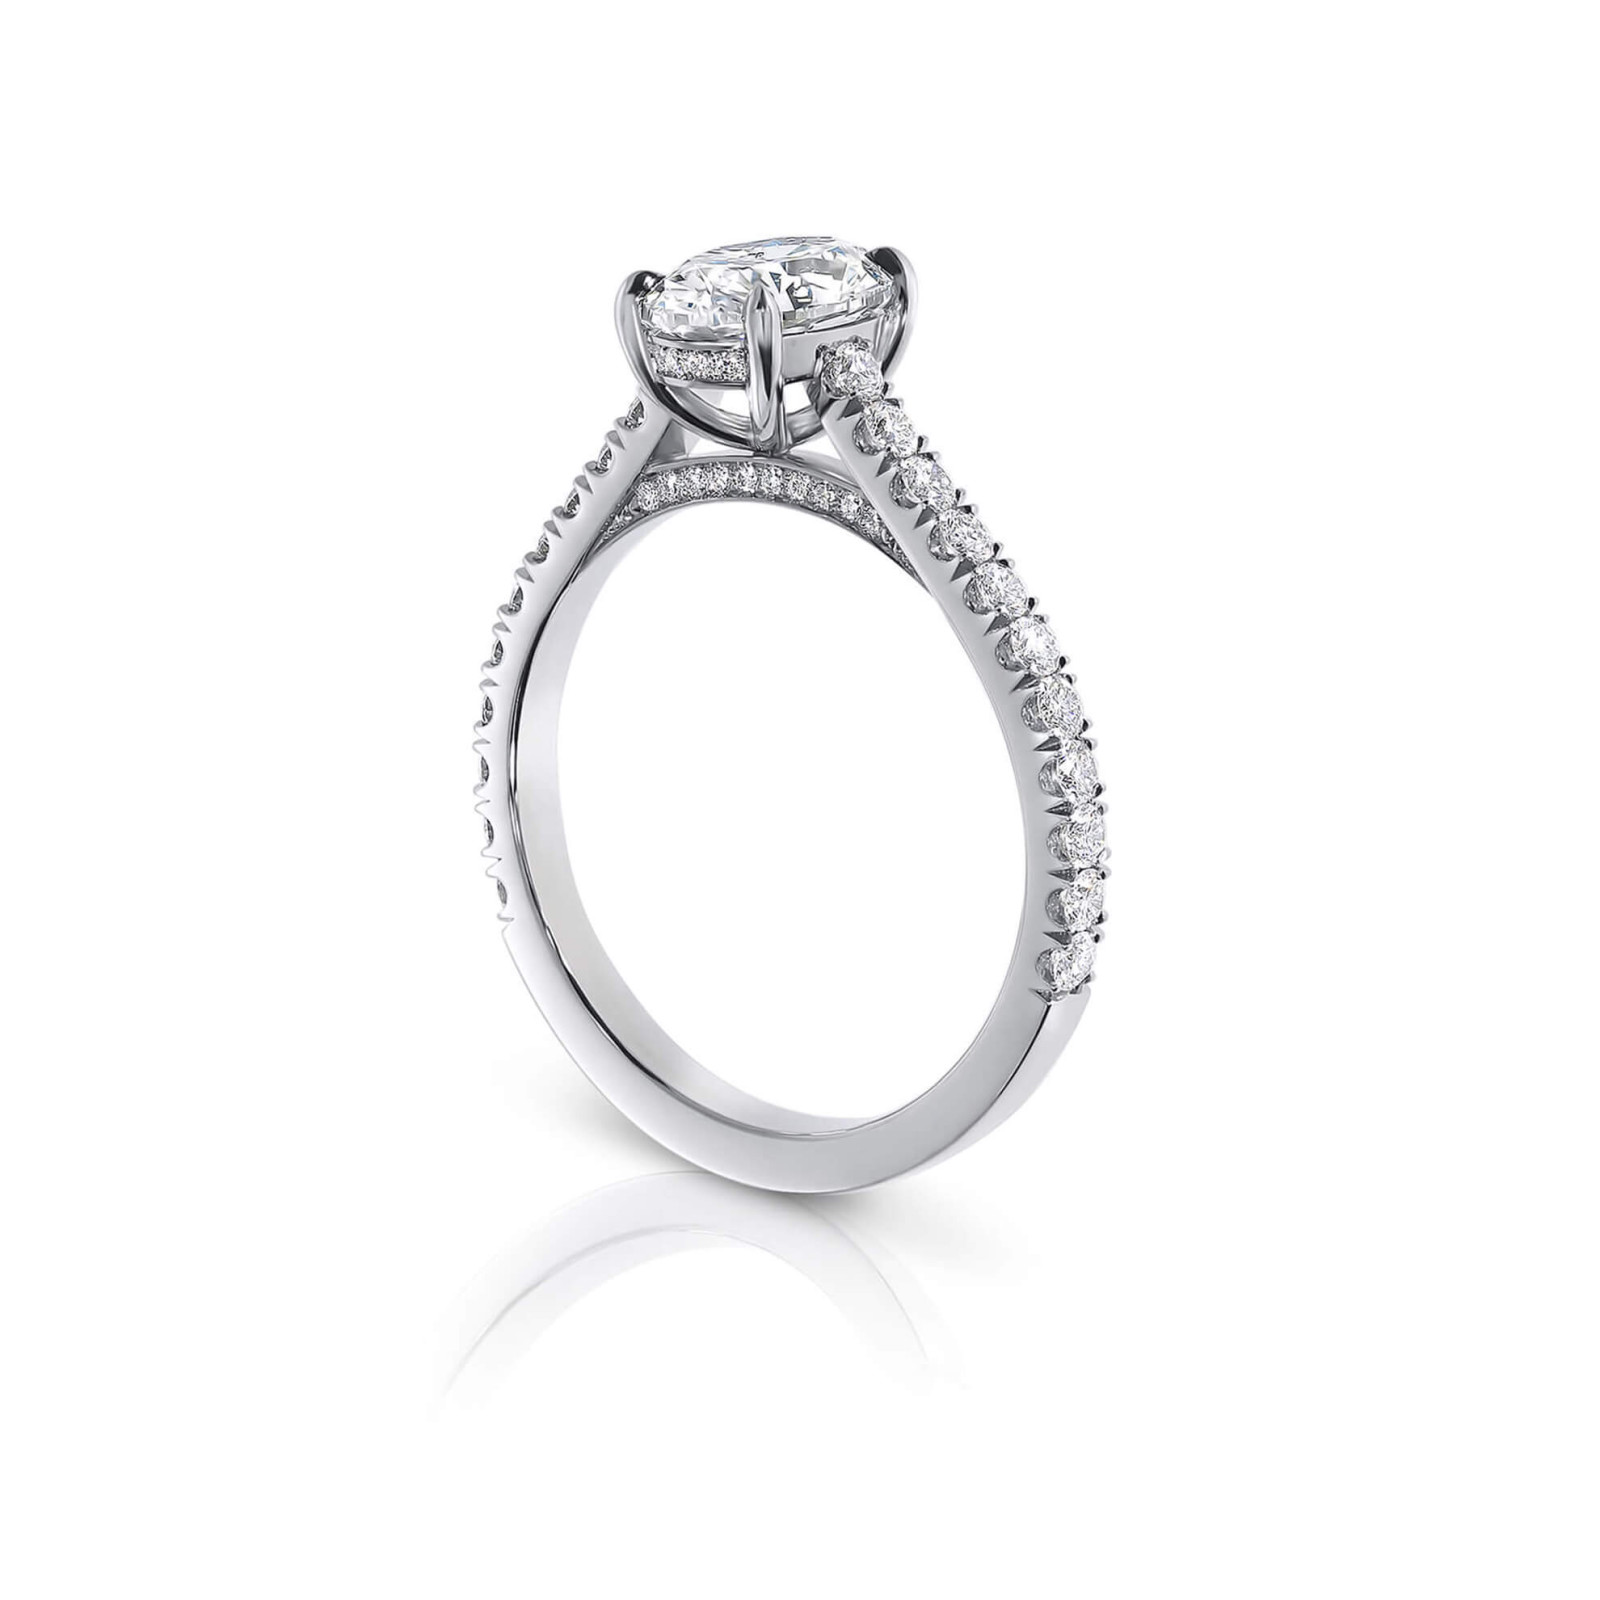 Oval Diamond Engagement Ring with Scallop Set Diamond Shoulders